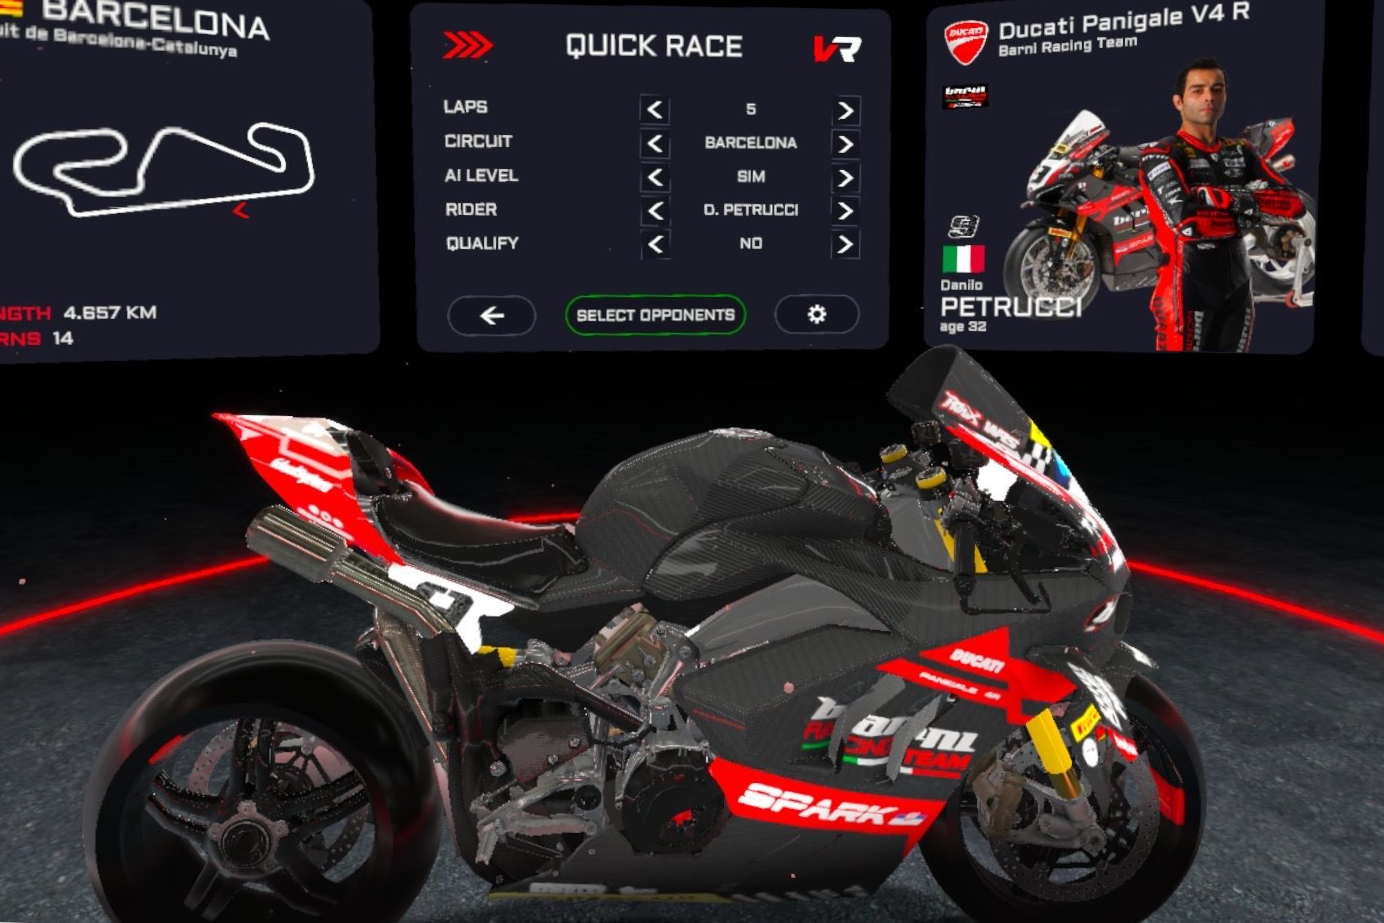 VRIDER screenshot - A menu for a racing game, motorbike in the front and a menu with several game options in the back.